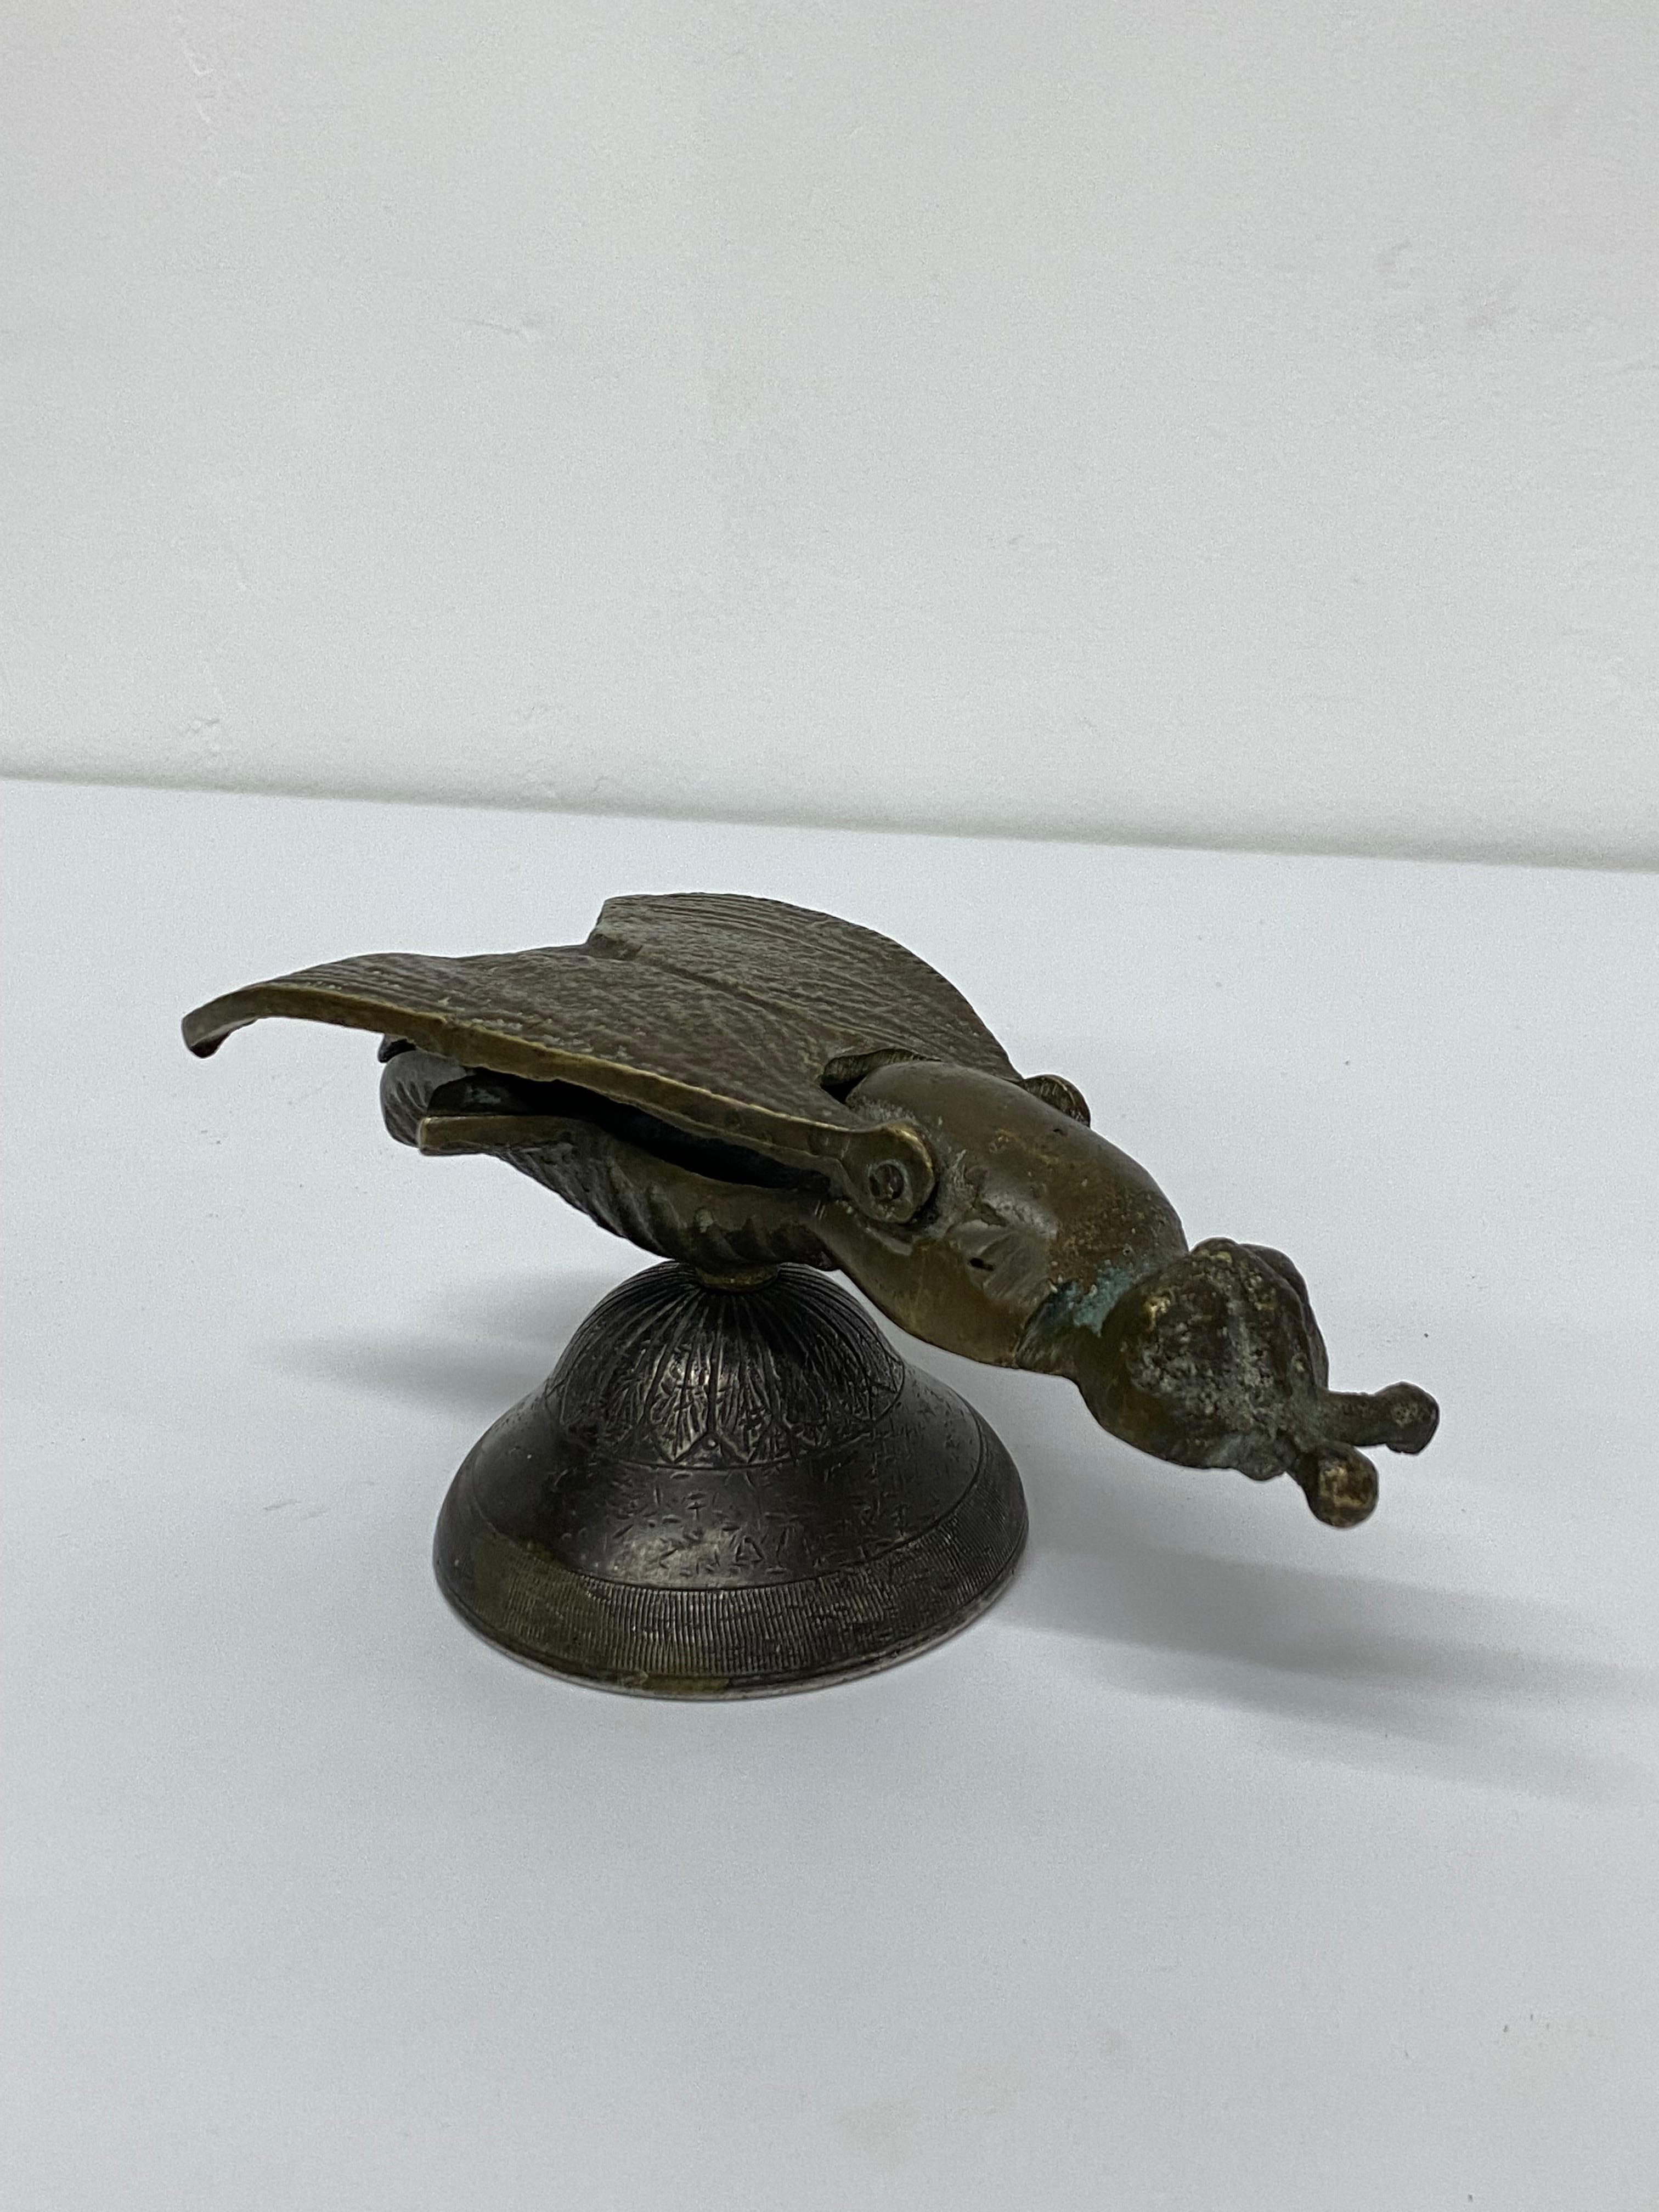 Patinated brass sculpted insect ashtray or catchall. Brazil, 1950s.